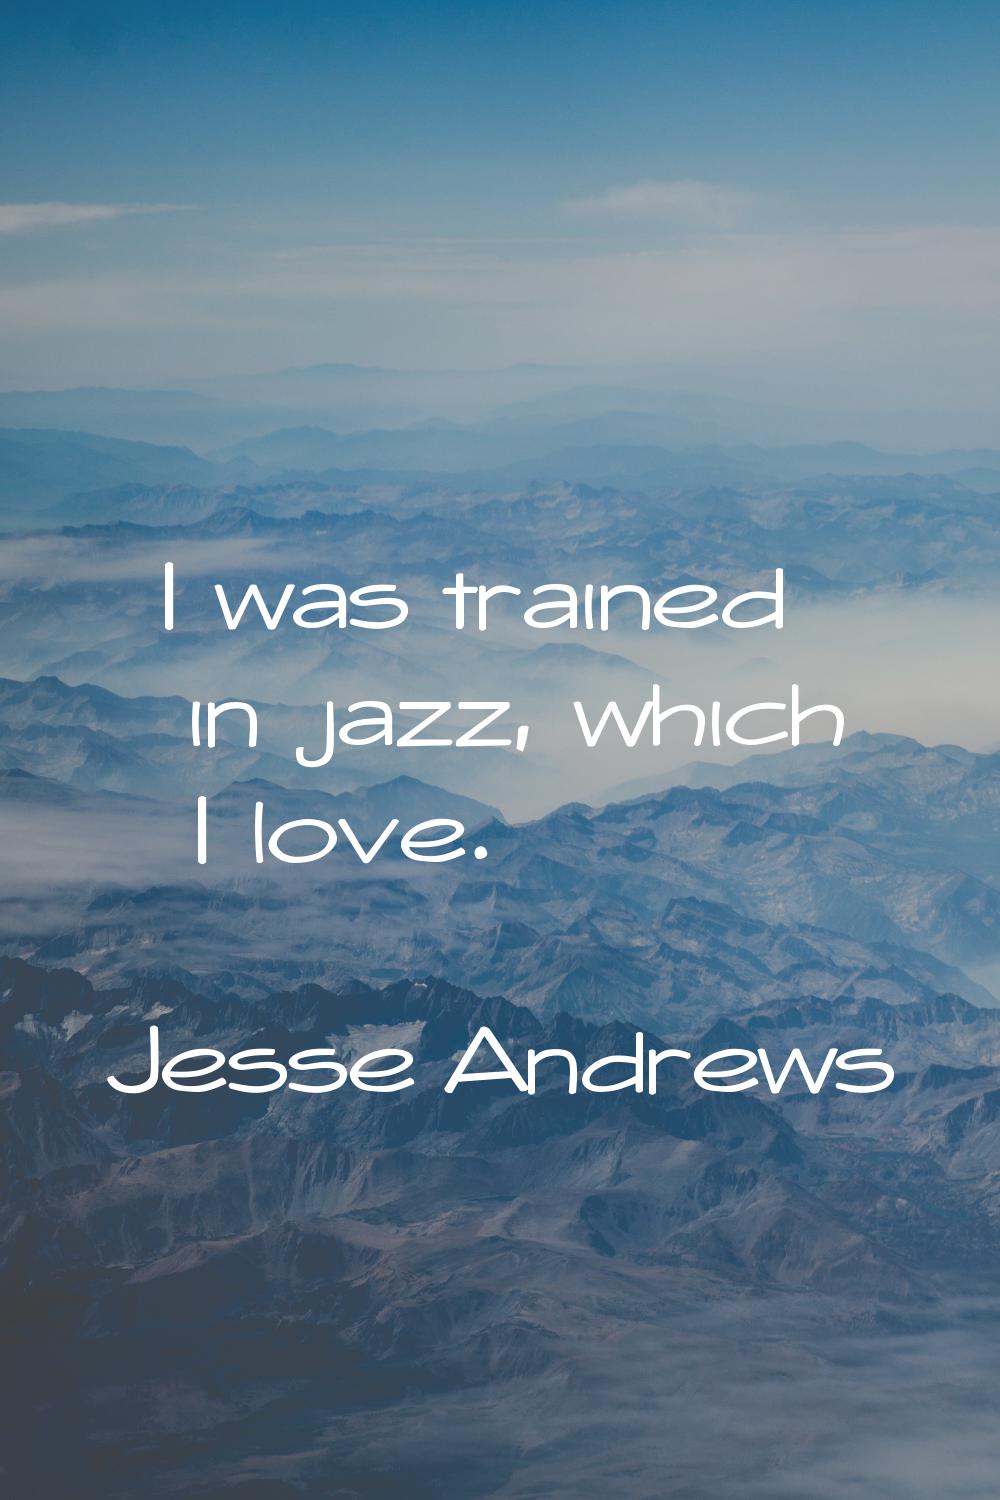 I was trained in jazz, which I love.